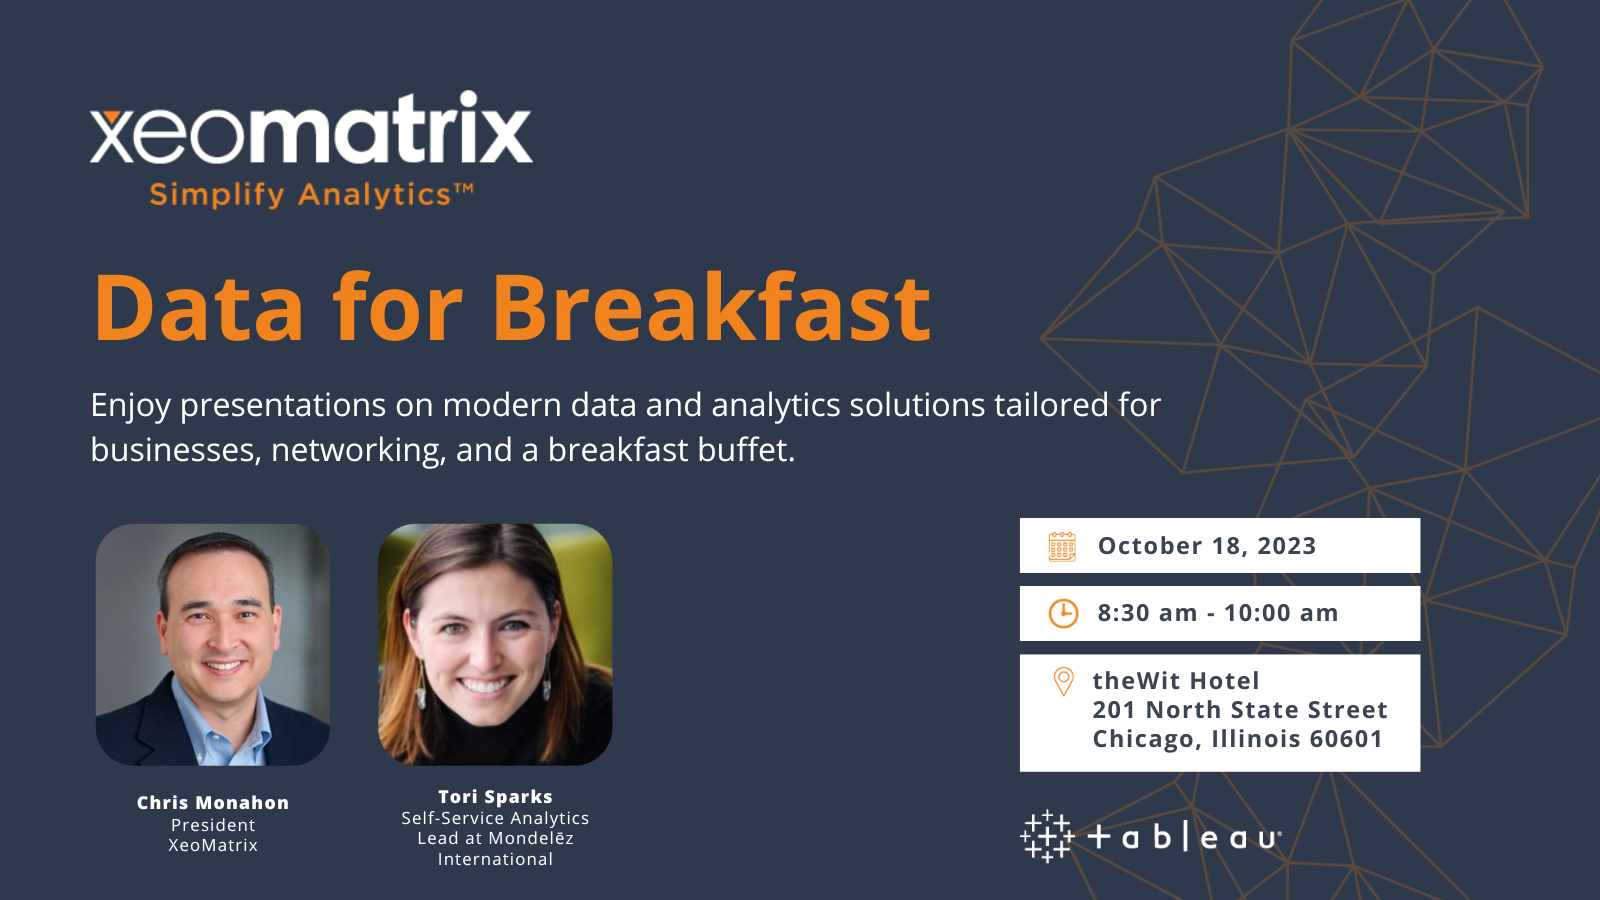 XeoMatrix Data for Breakfast. Enjoy presentations on modern data and analytics solutions tailored for businesses, networking, and a breakfast buffet. October 18, 2023. 8:30-10:00 AM. theWit Hotel 201 North State Street Chicago, Illinois 60601.